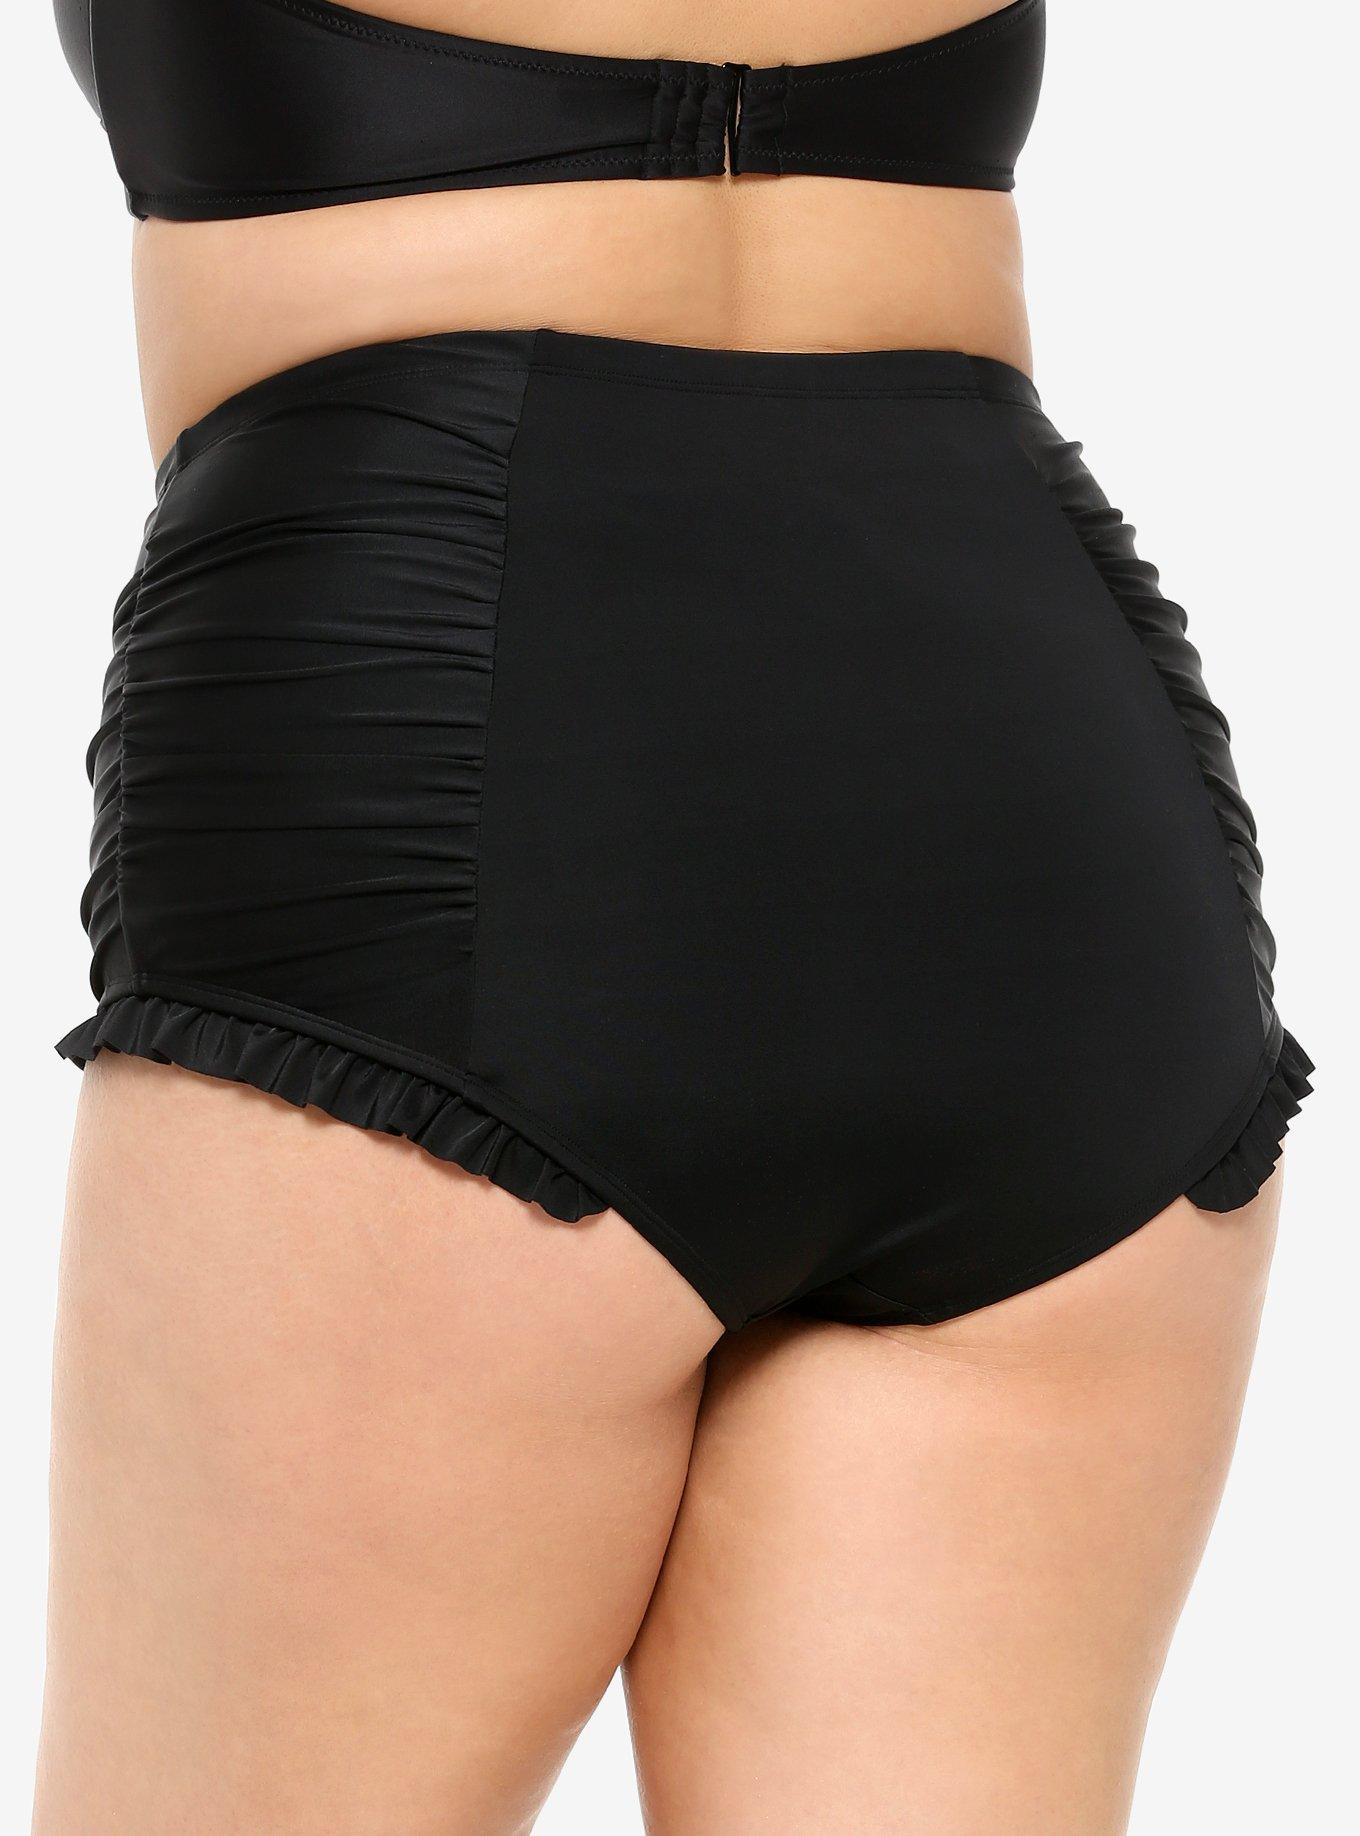 Black Ruched High-Wasited Swim Bottoms Plus Size, MULTI, alternate